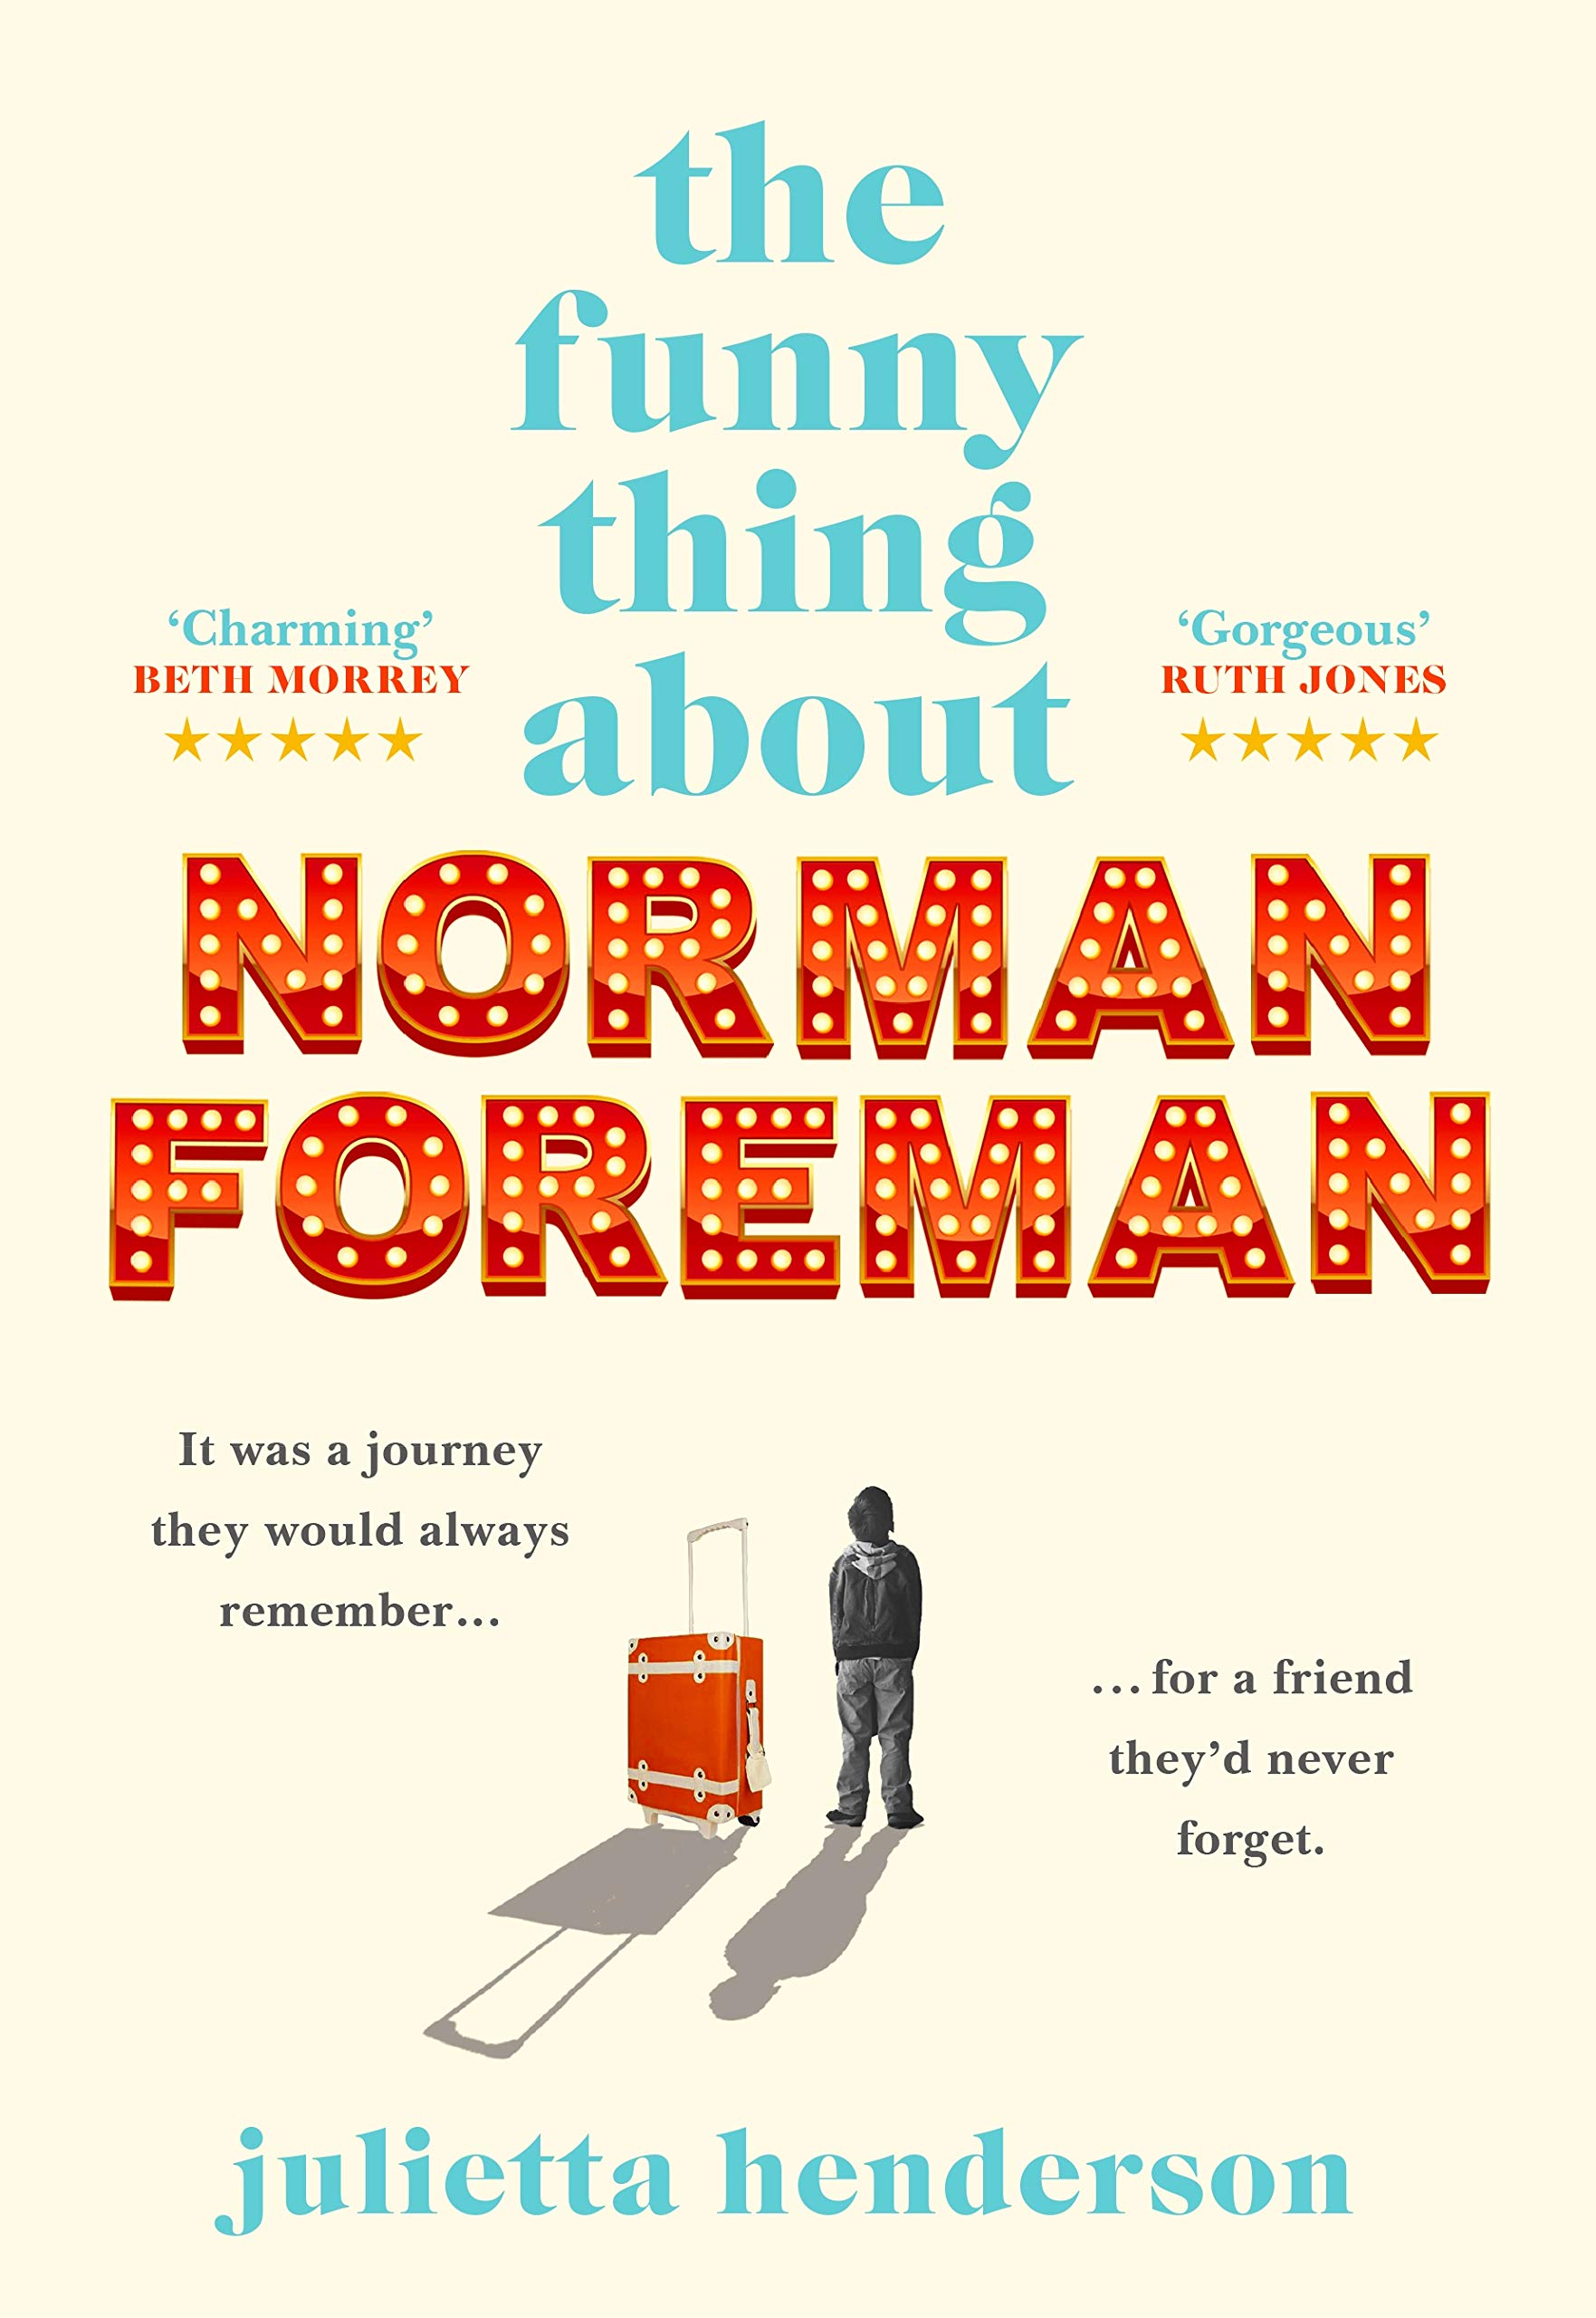 The Funny Thing about Norman Foreman | Julietta Henderson